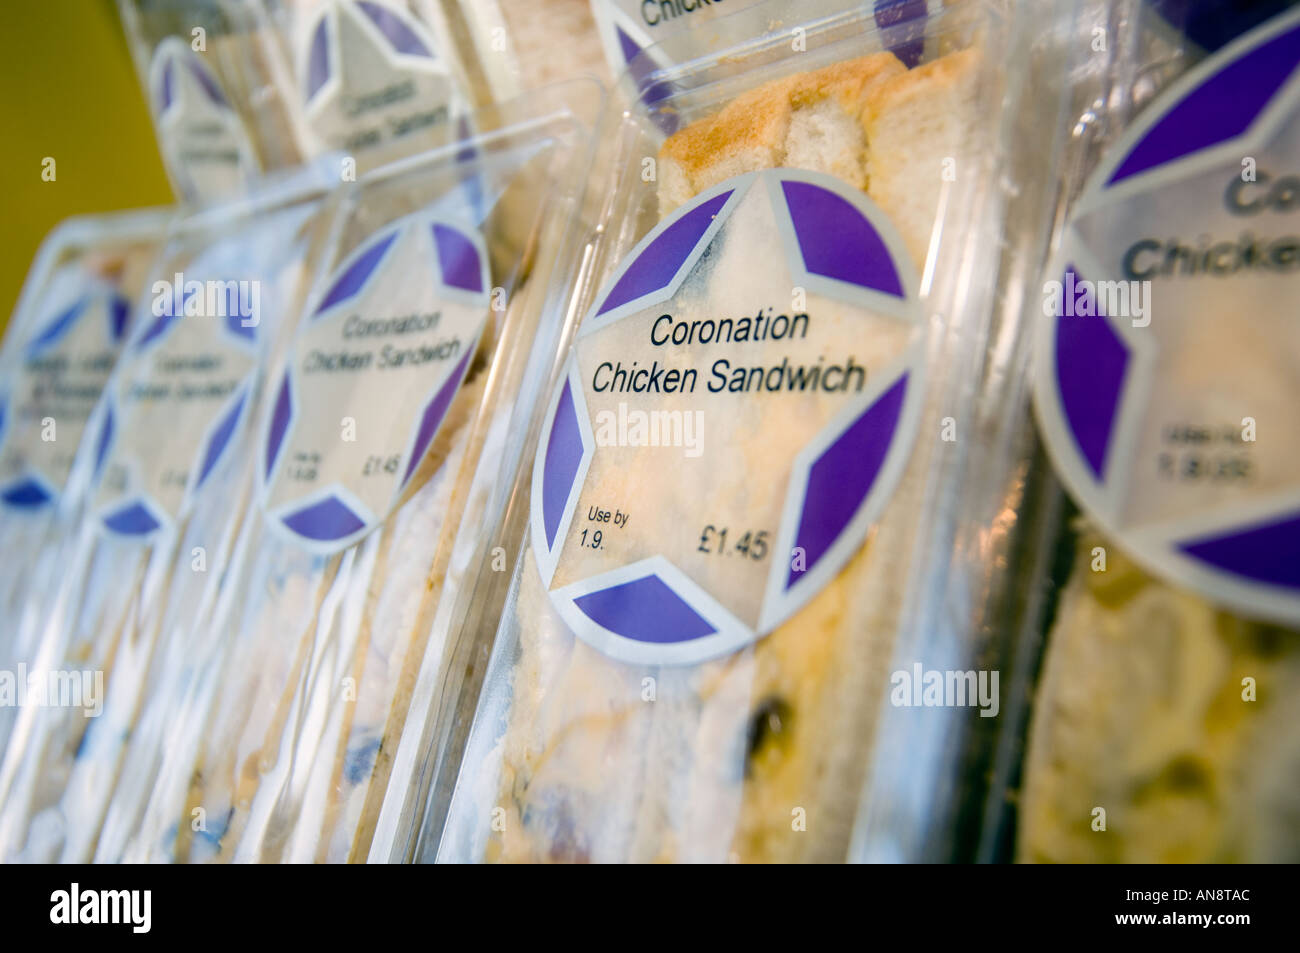 display of prepackaged sandwiches in a supermarket Stock Photo